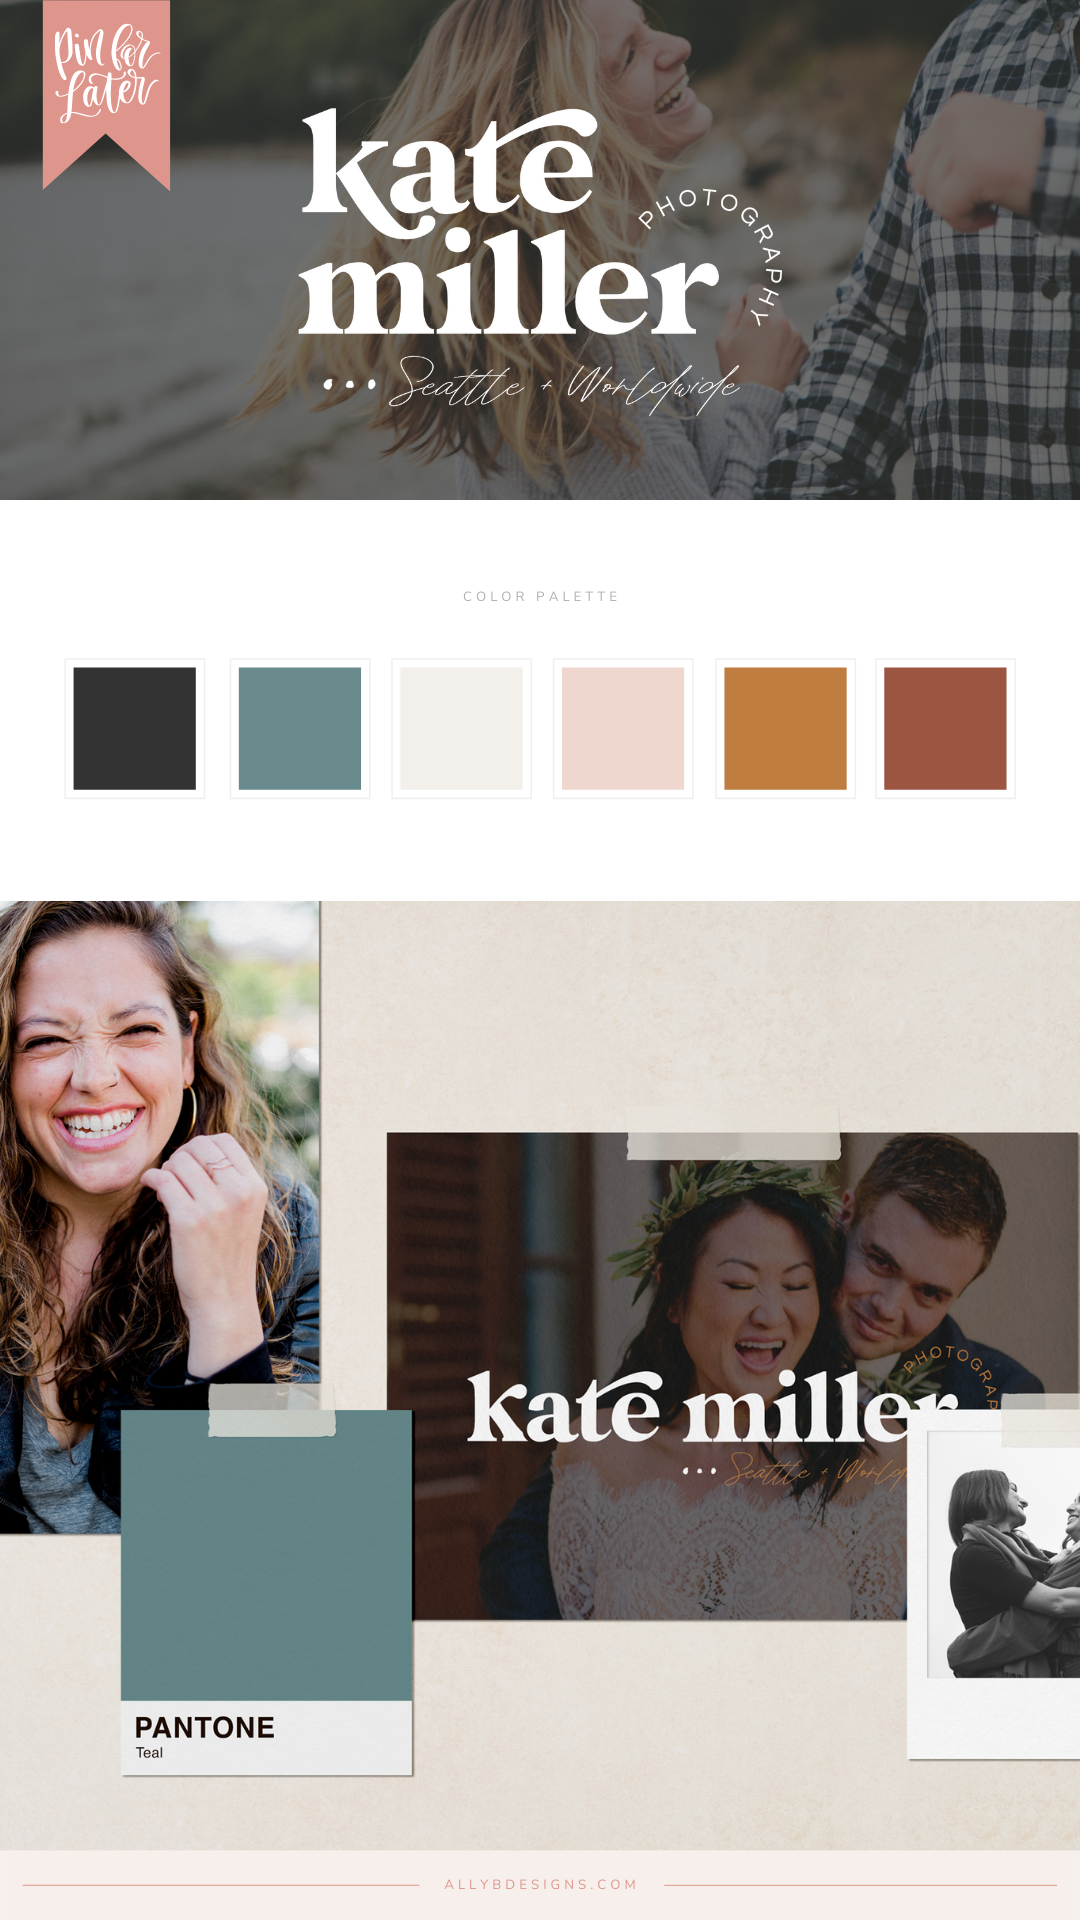 Client Launch: A Bold and Colorful Wedding Photographer Brand for Kate Miller Photography by Ally B Designs